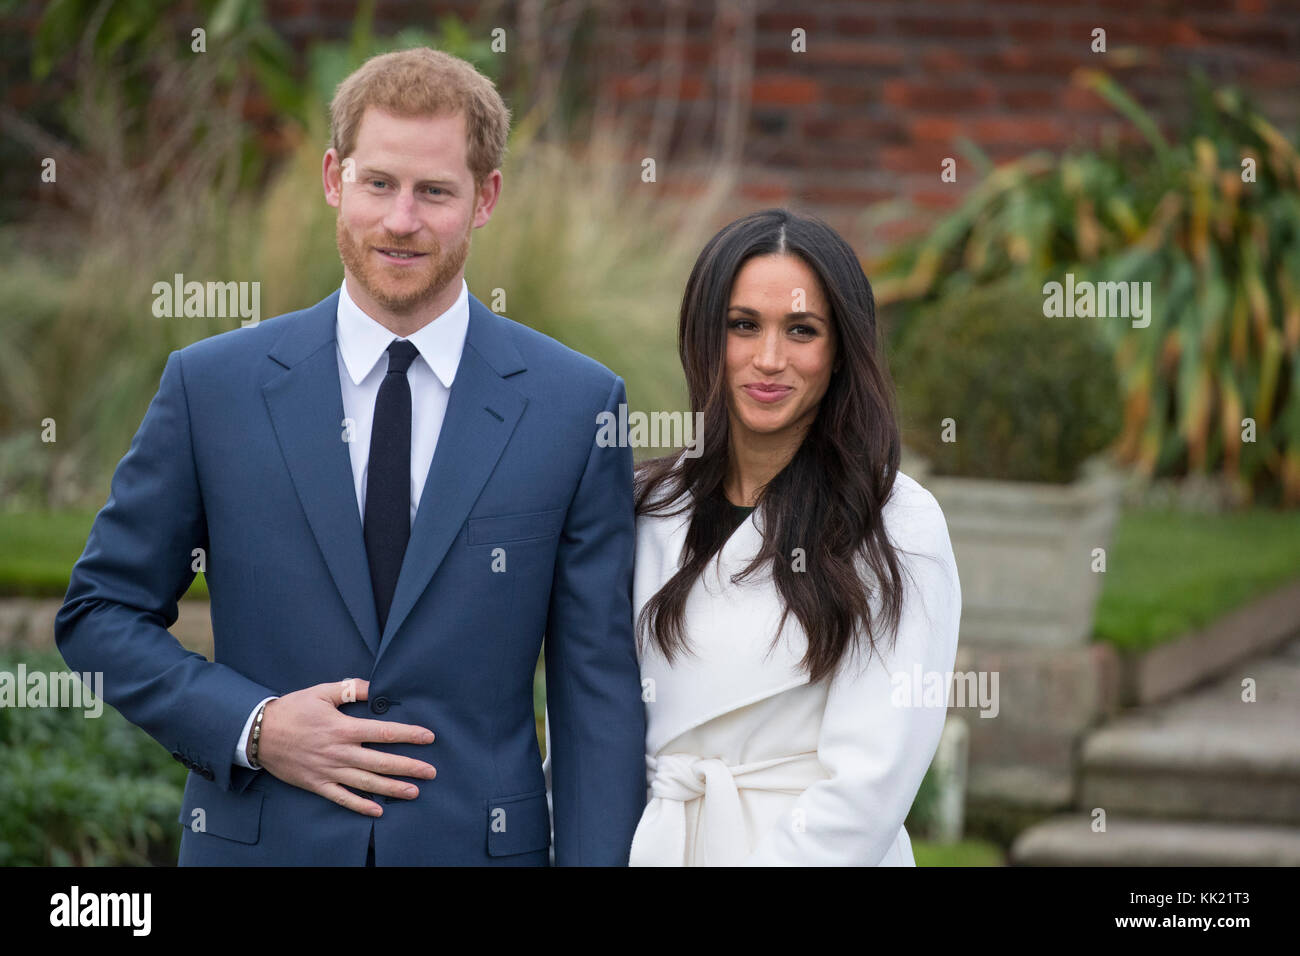 27th November 2017 London UK Britain's Prince Harry and his girlfriend Meghan Markle pose for photographs in the Sunken Garden at Kensington Palace in London after they announced their engagement. Stock Photo